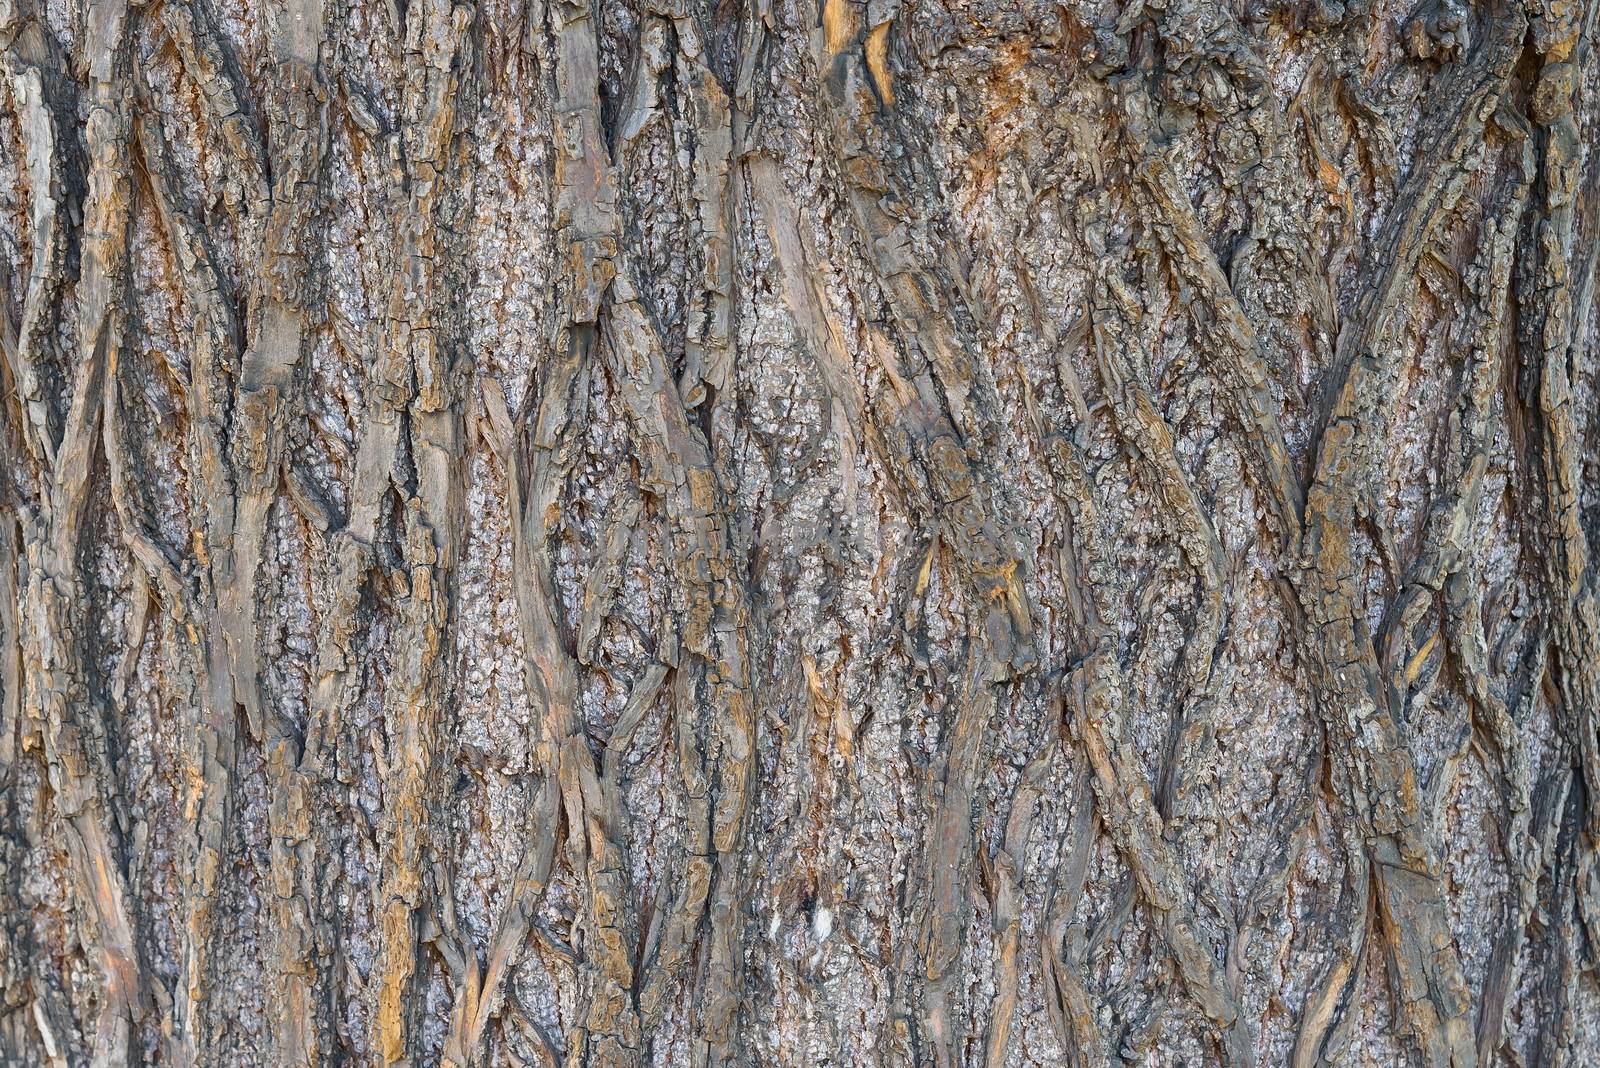 Natural background made of tree bark by mkos83